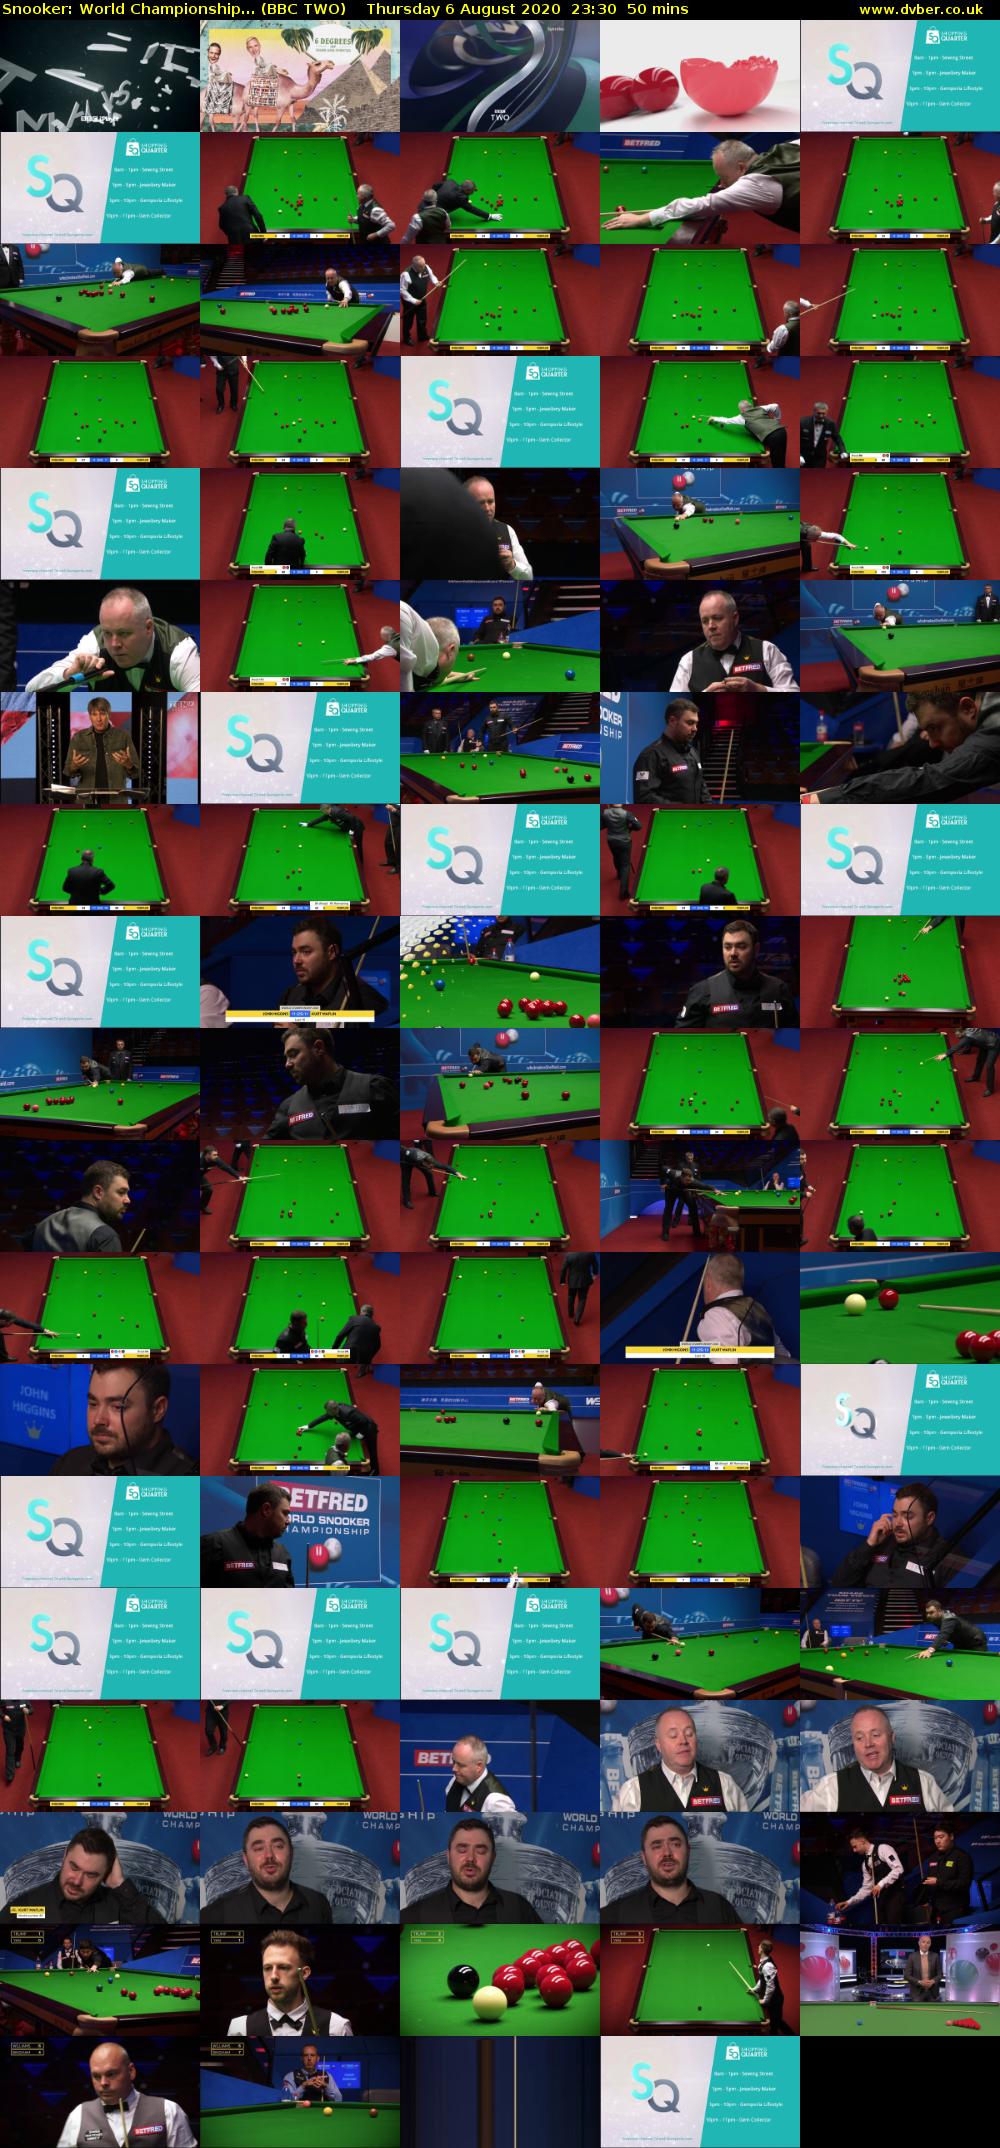 Snooker: World Championship... (BBC TWO) Thursday 6 August 2020 23:30 - 00:20